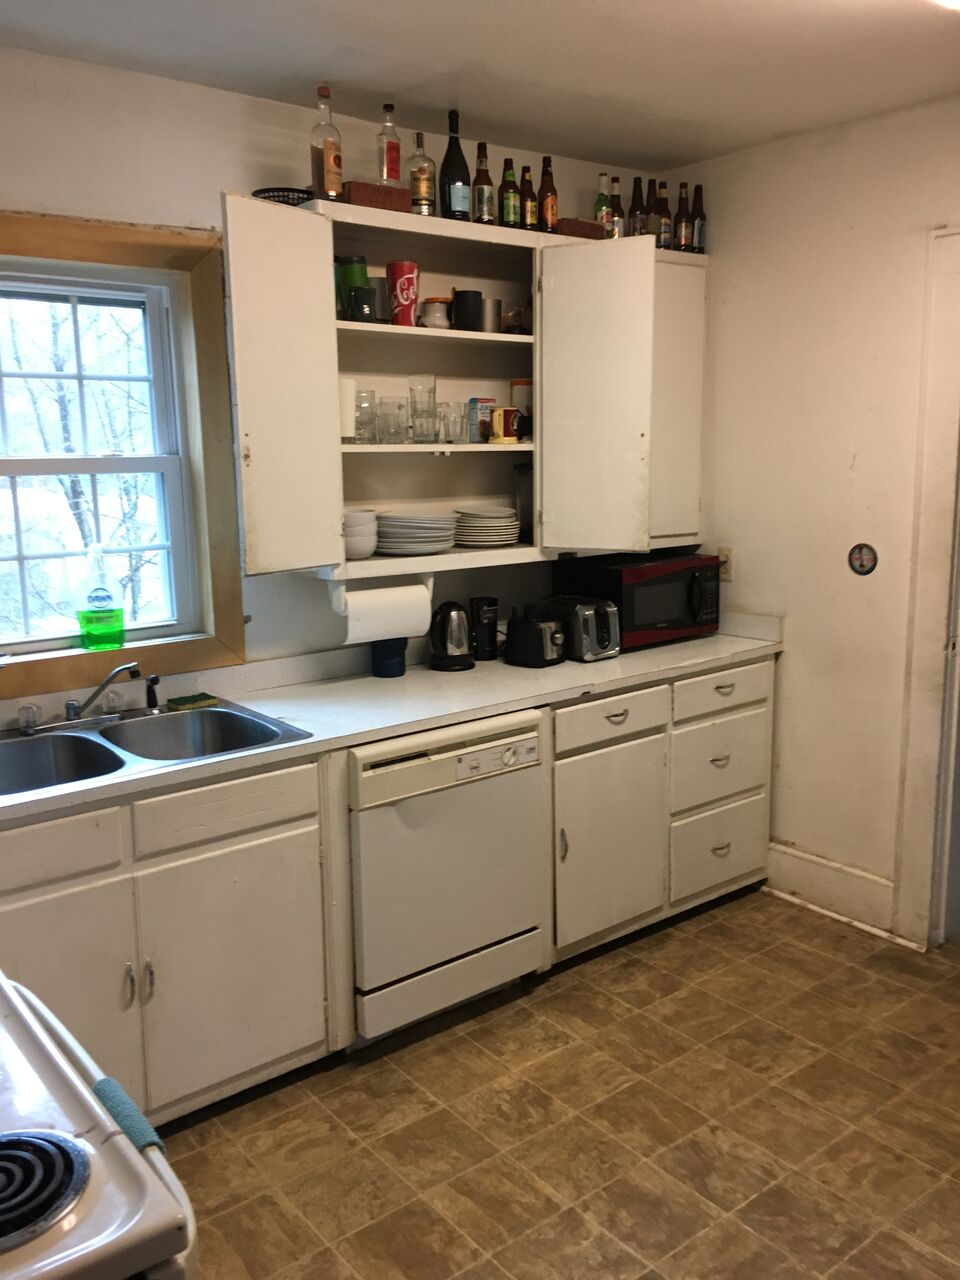 (#6) 454 Oak Street (Rented Through July 2025) - WV Investments